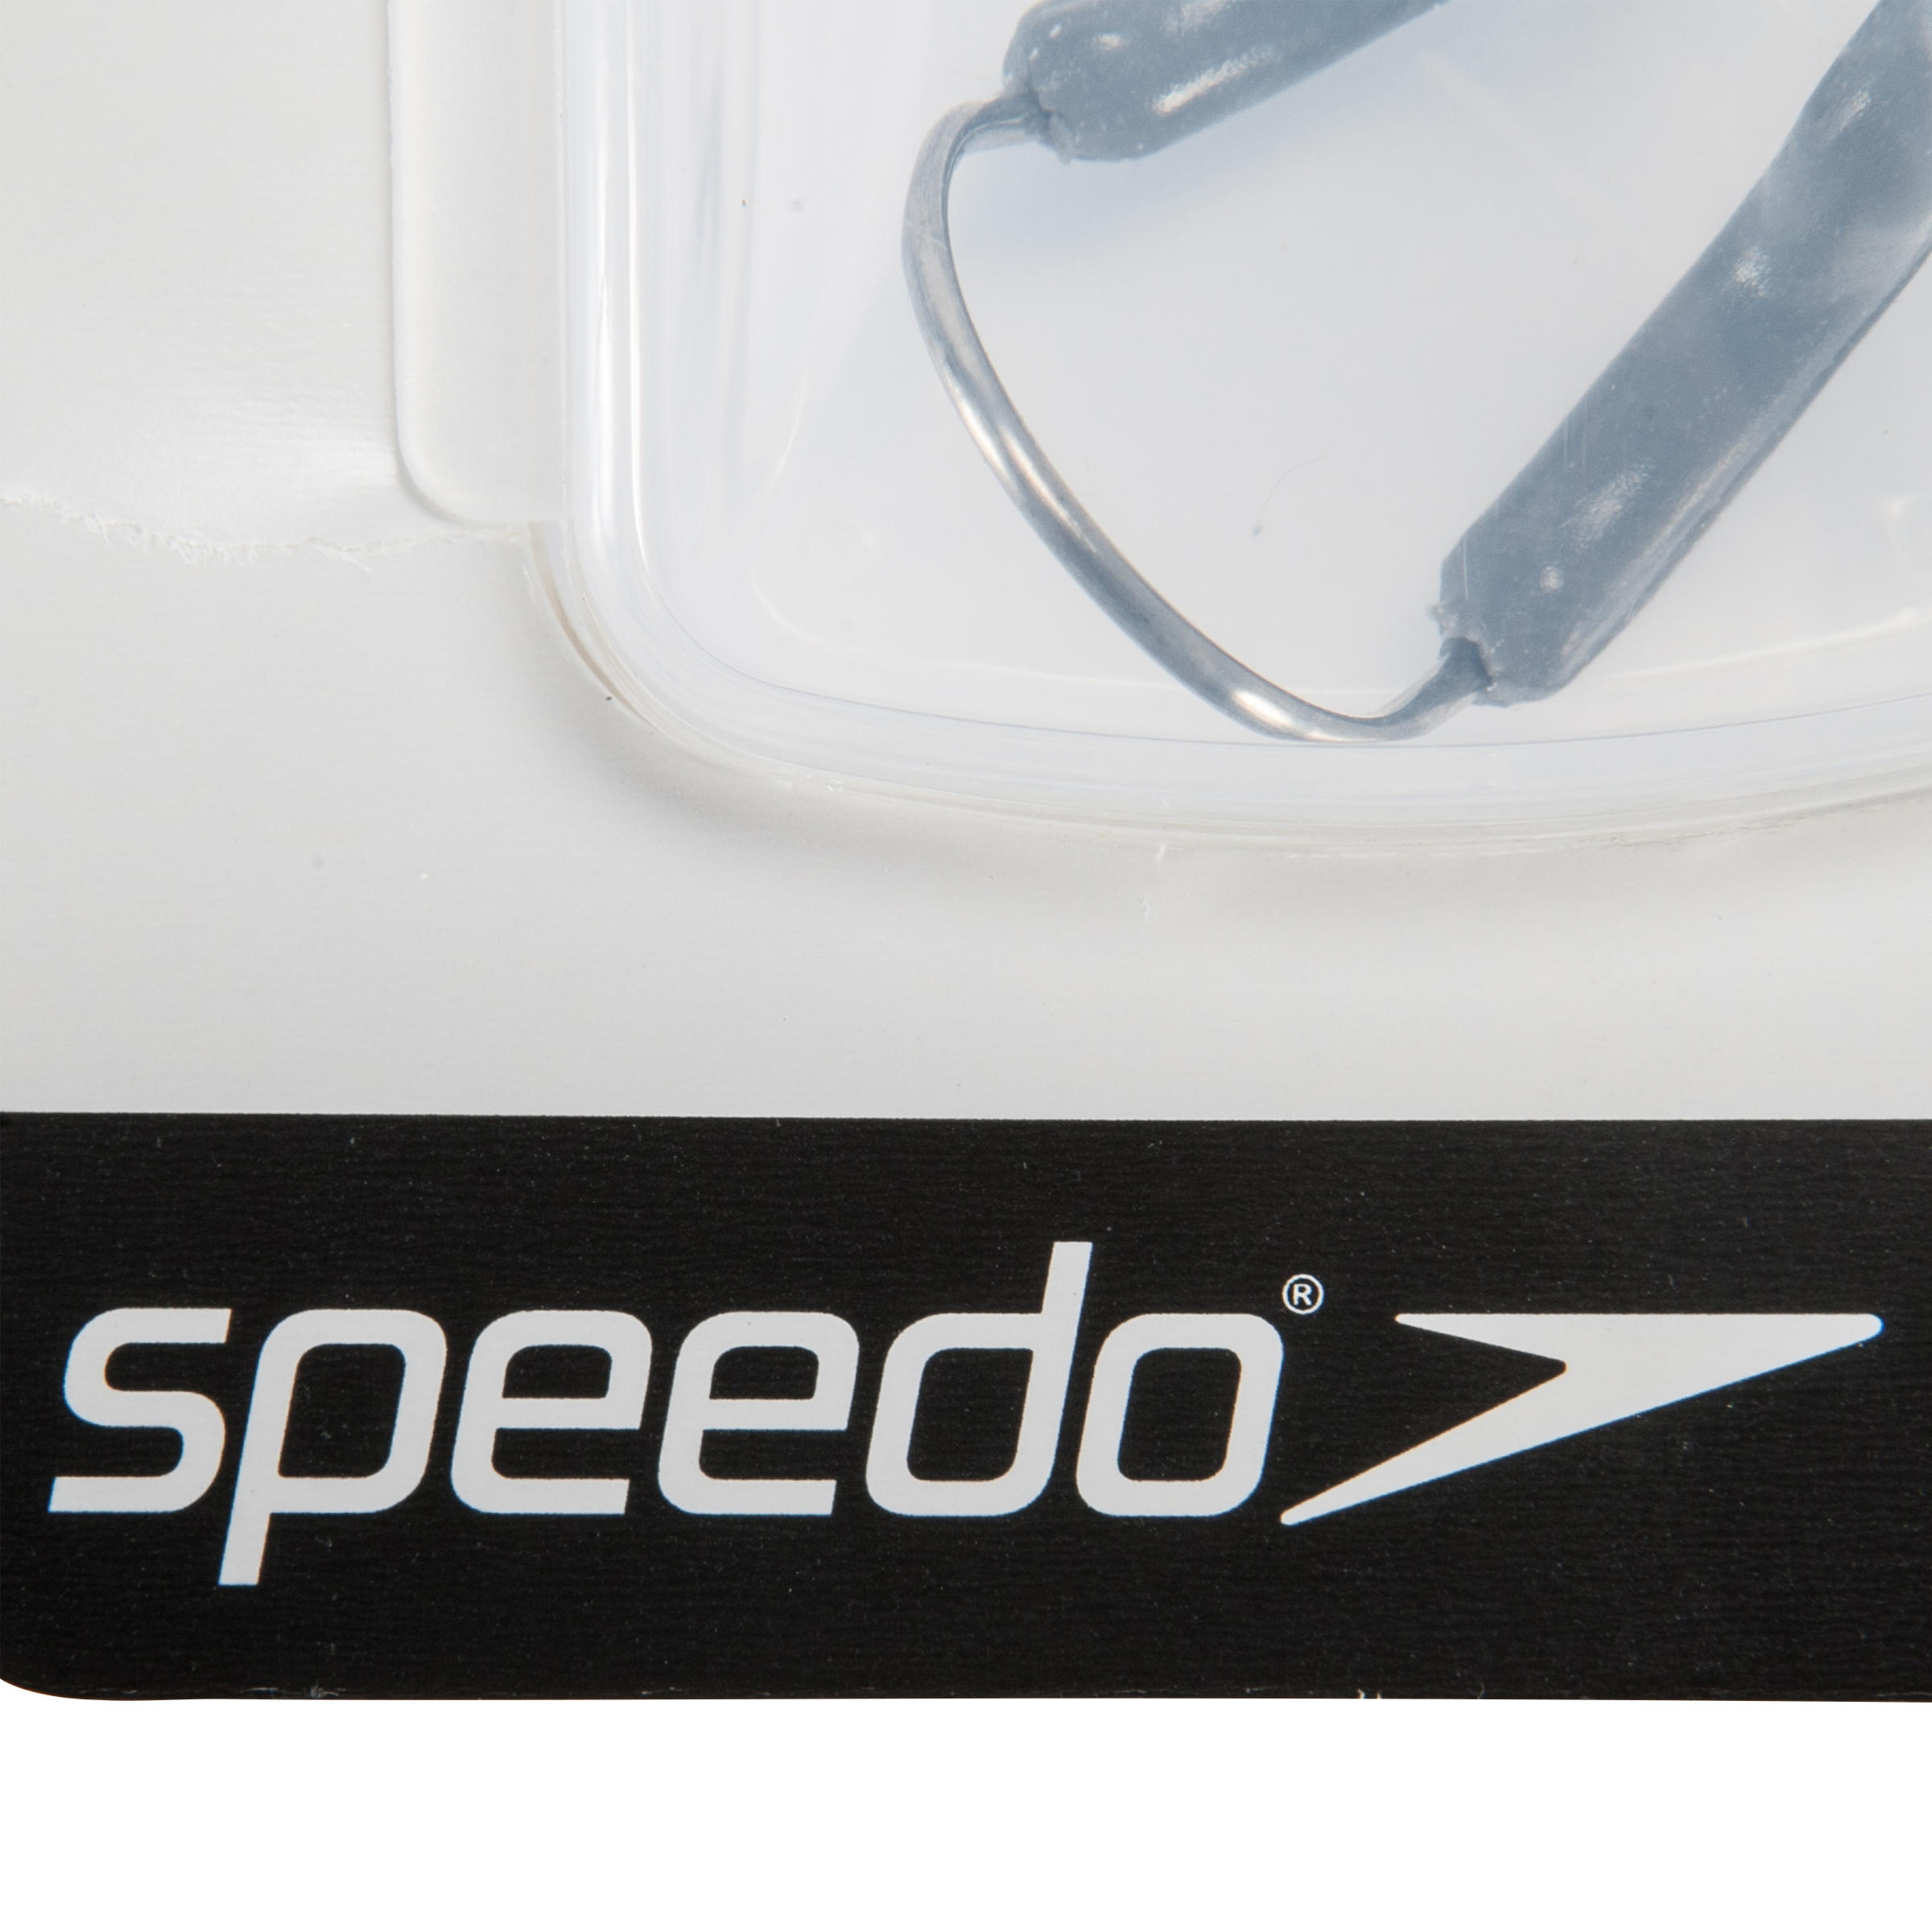 SPEEDO COMPETITION NOSE CLIP - GREY BLUE 7/10